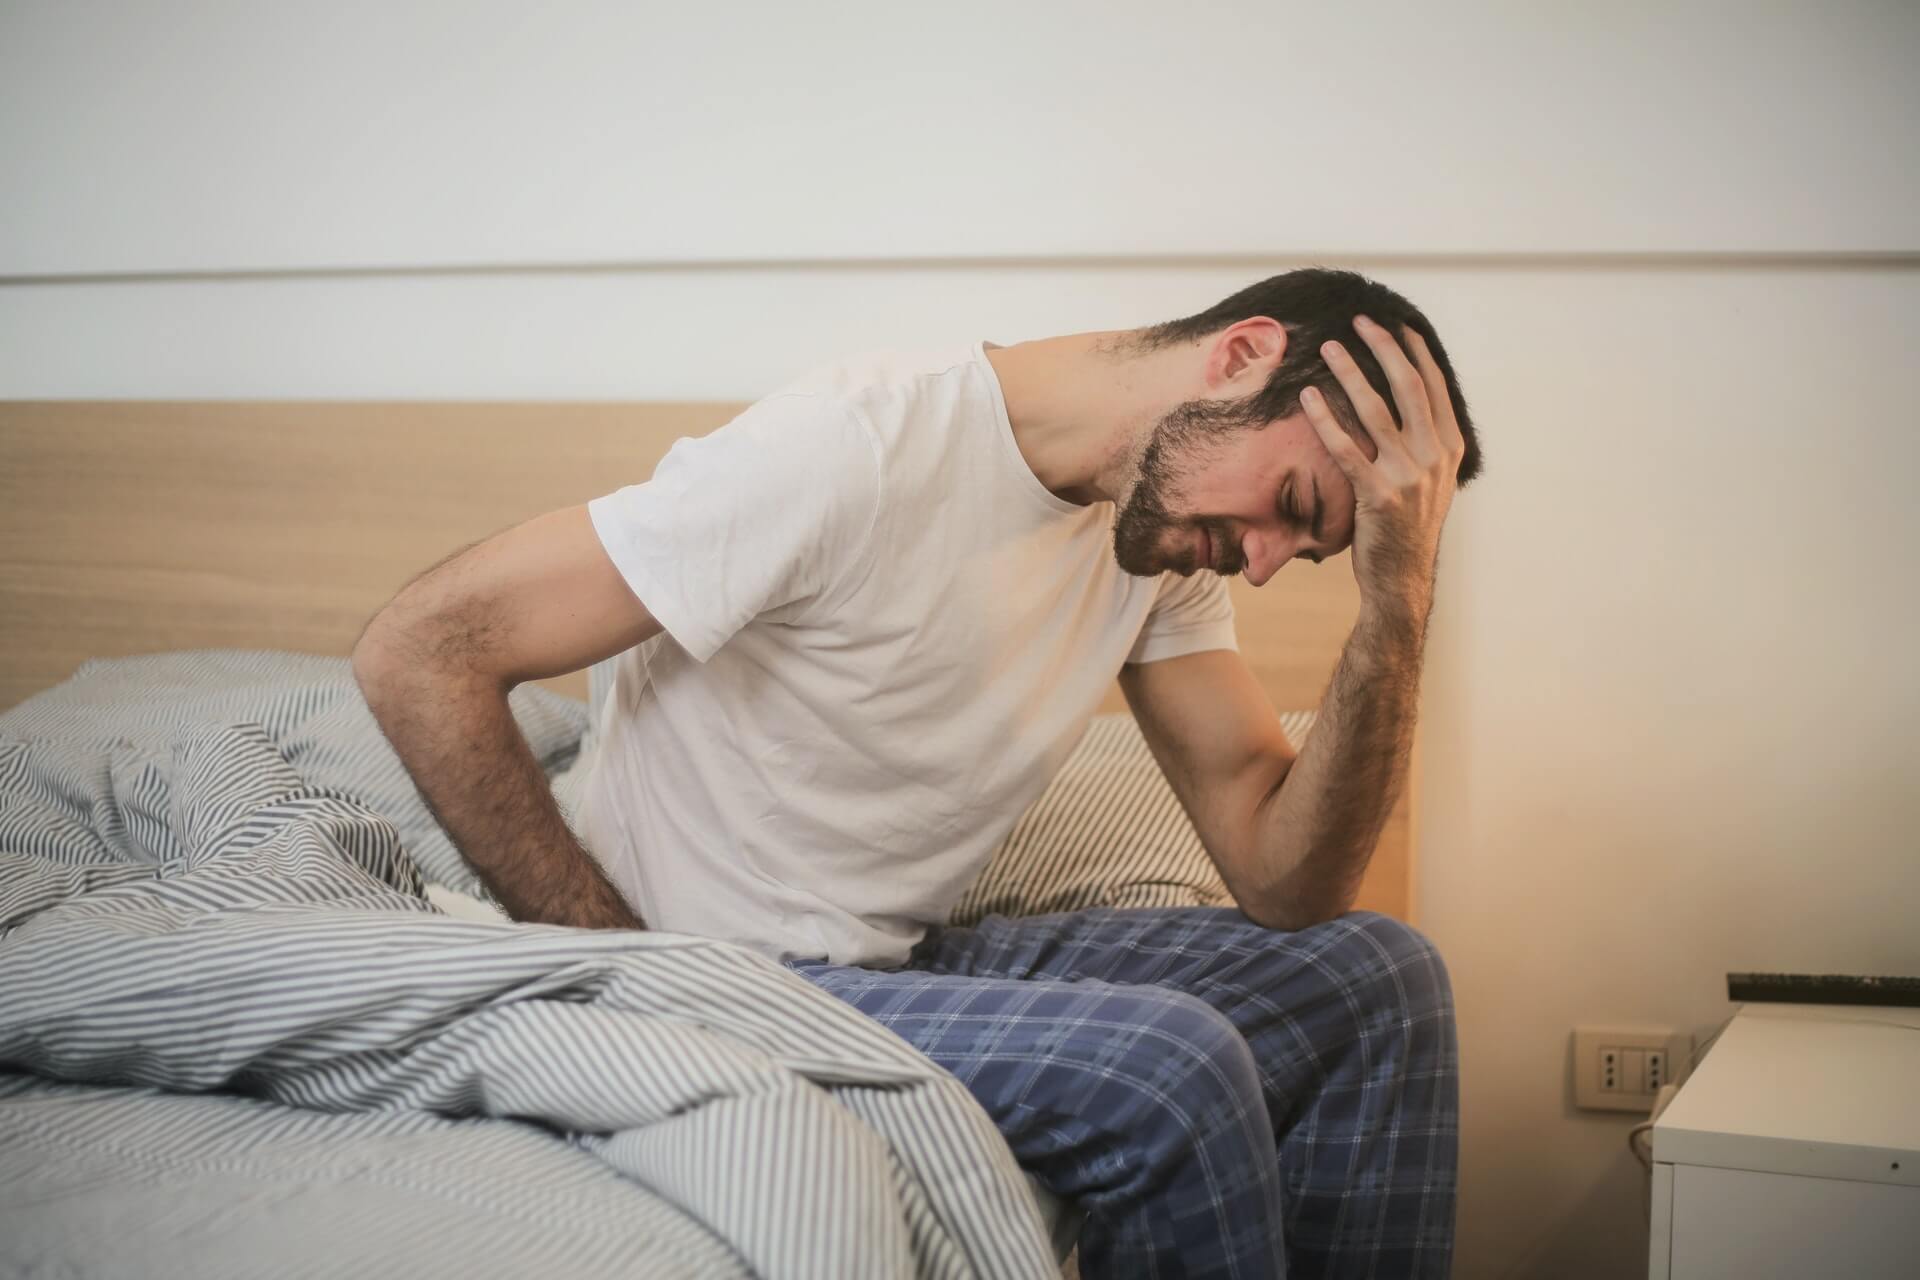 Shocking poll: Nearly 1 in 3 Americans live in constant pain